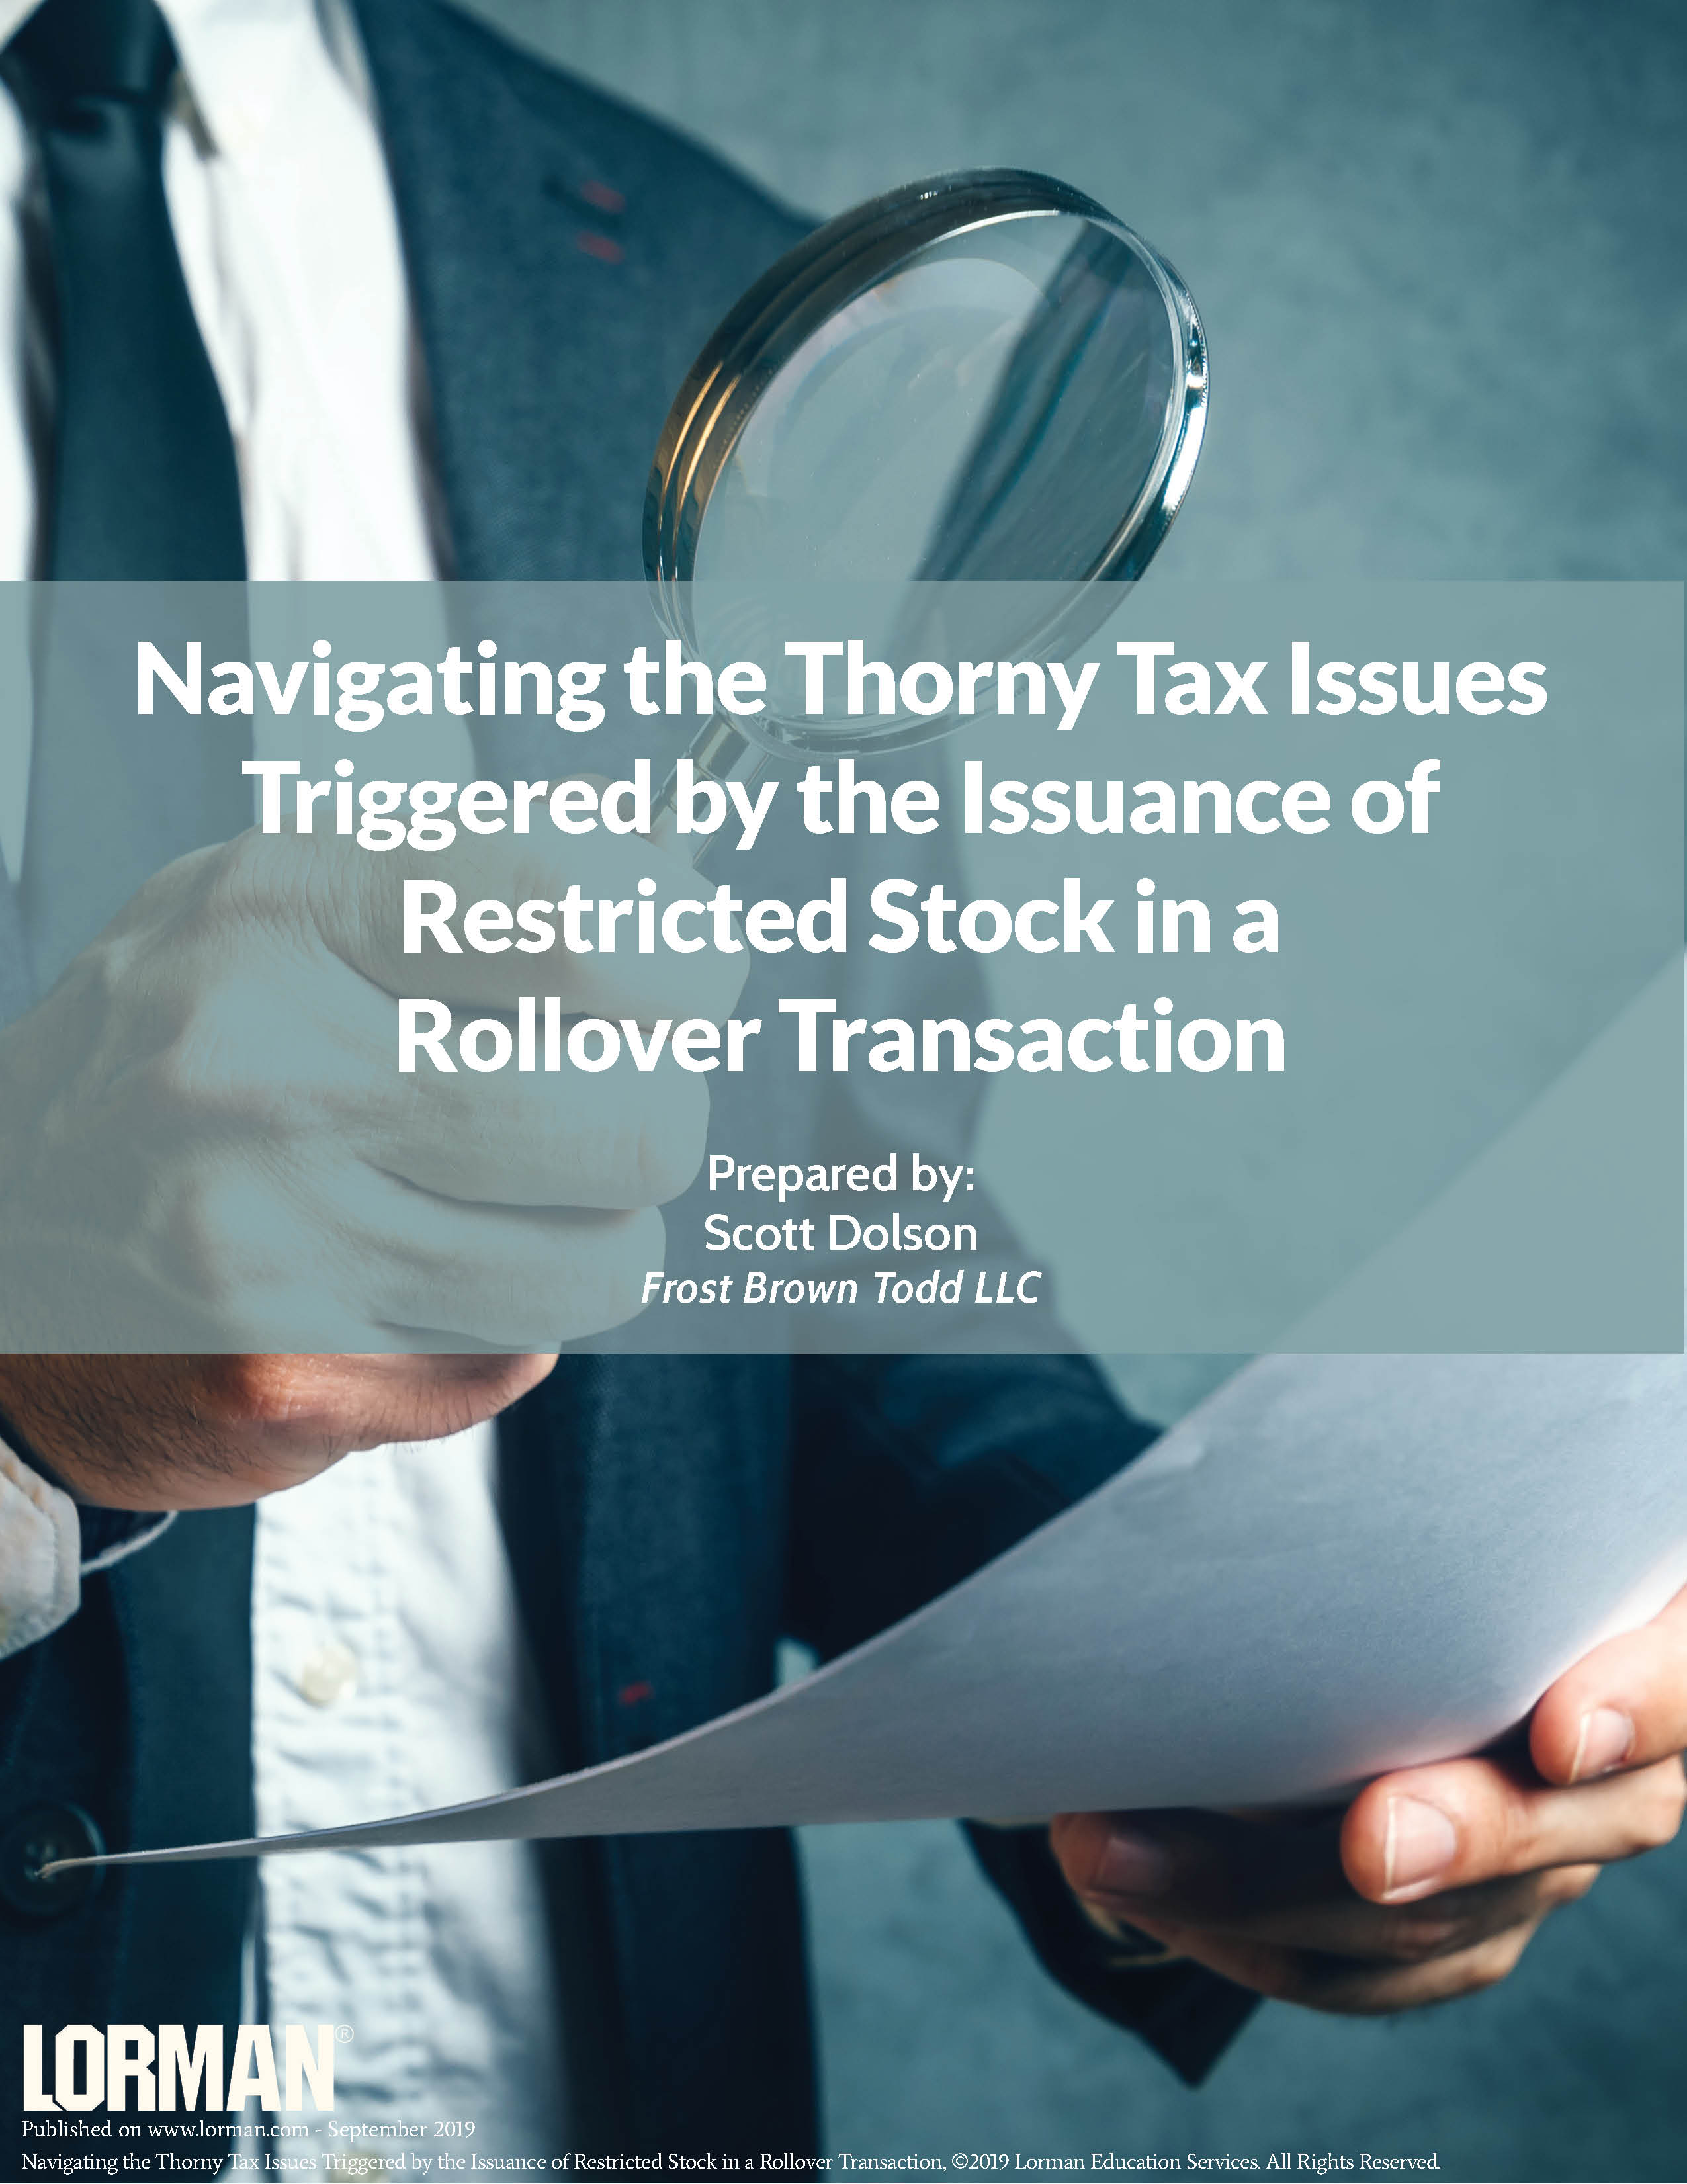 Navigating the Tax Issues Triggered by the Issuance of Restricted Stock in a Rollover Transaction